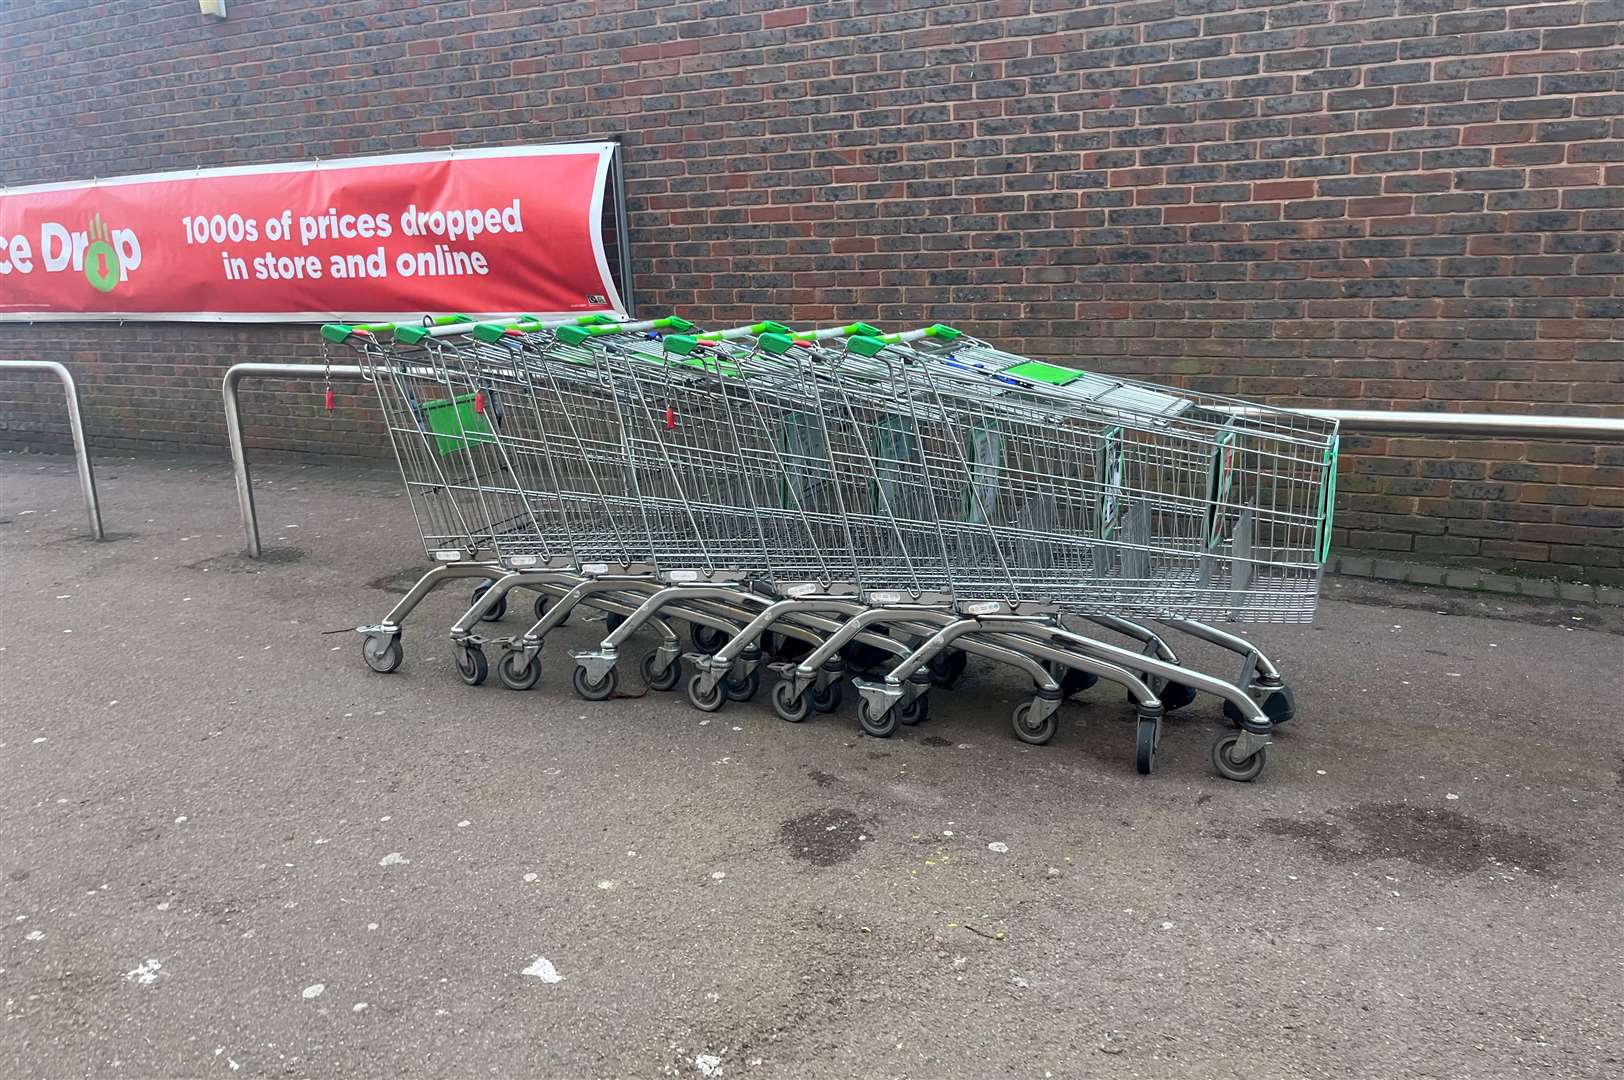 Asda in Swanley has agreed to implement new mag-lock technology on its trolleys after a rise in the number of them being abandoned